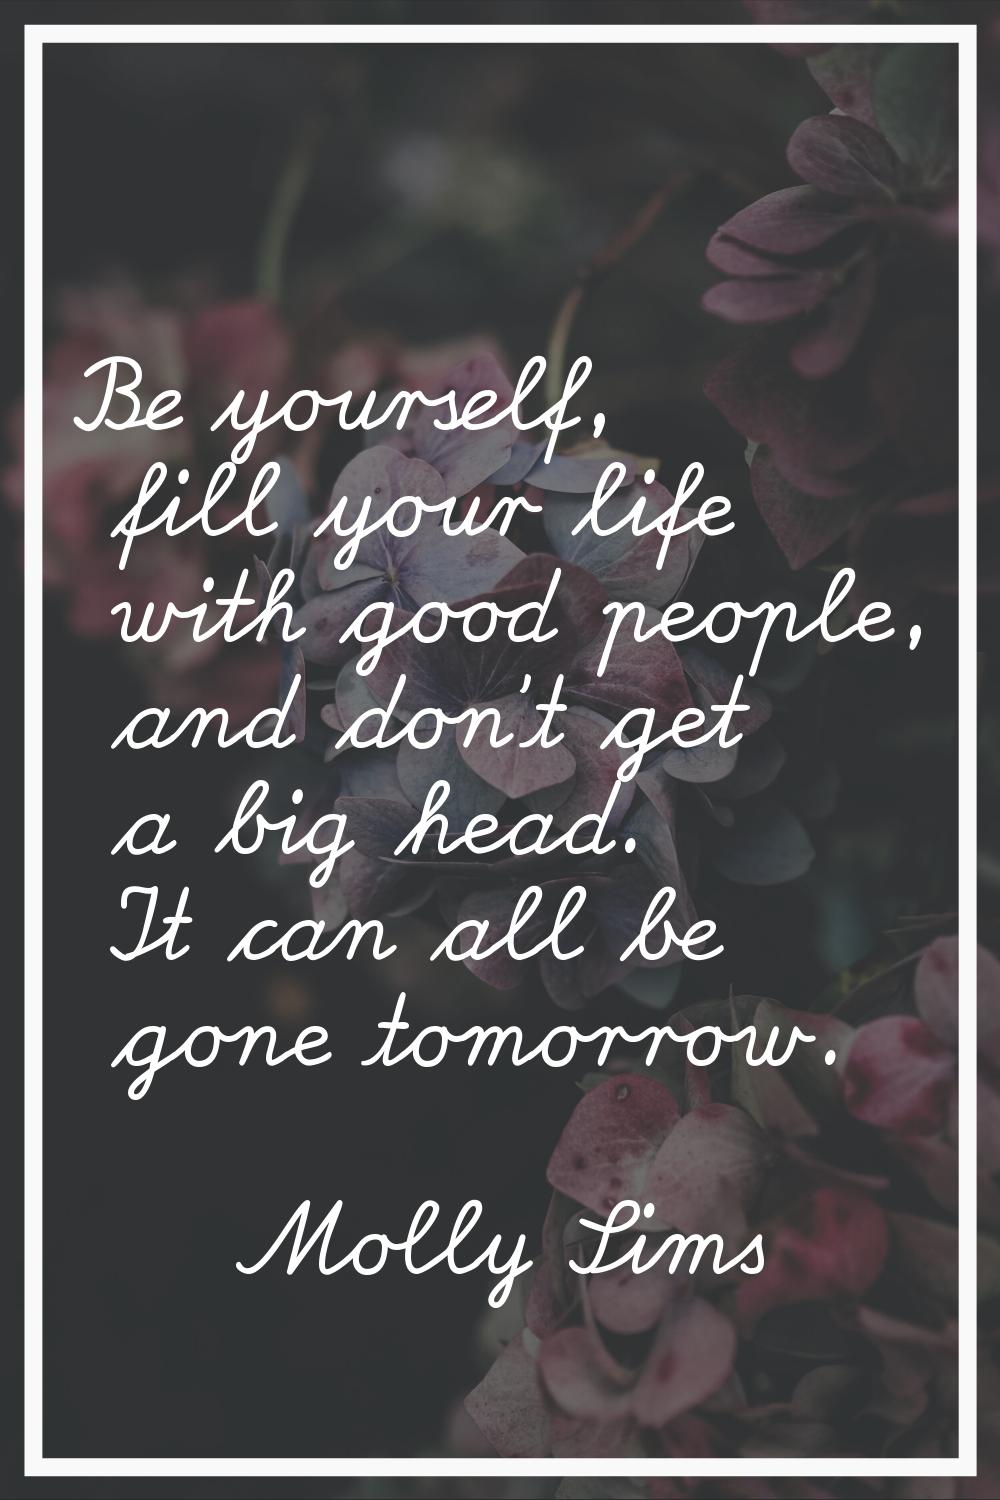 Be yourself, fill your life with good people, and don't get a big head. It can all be gone tomorrow